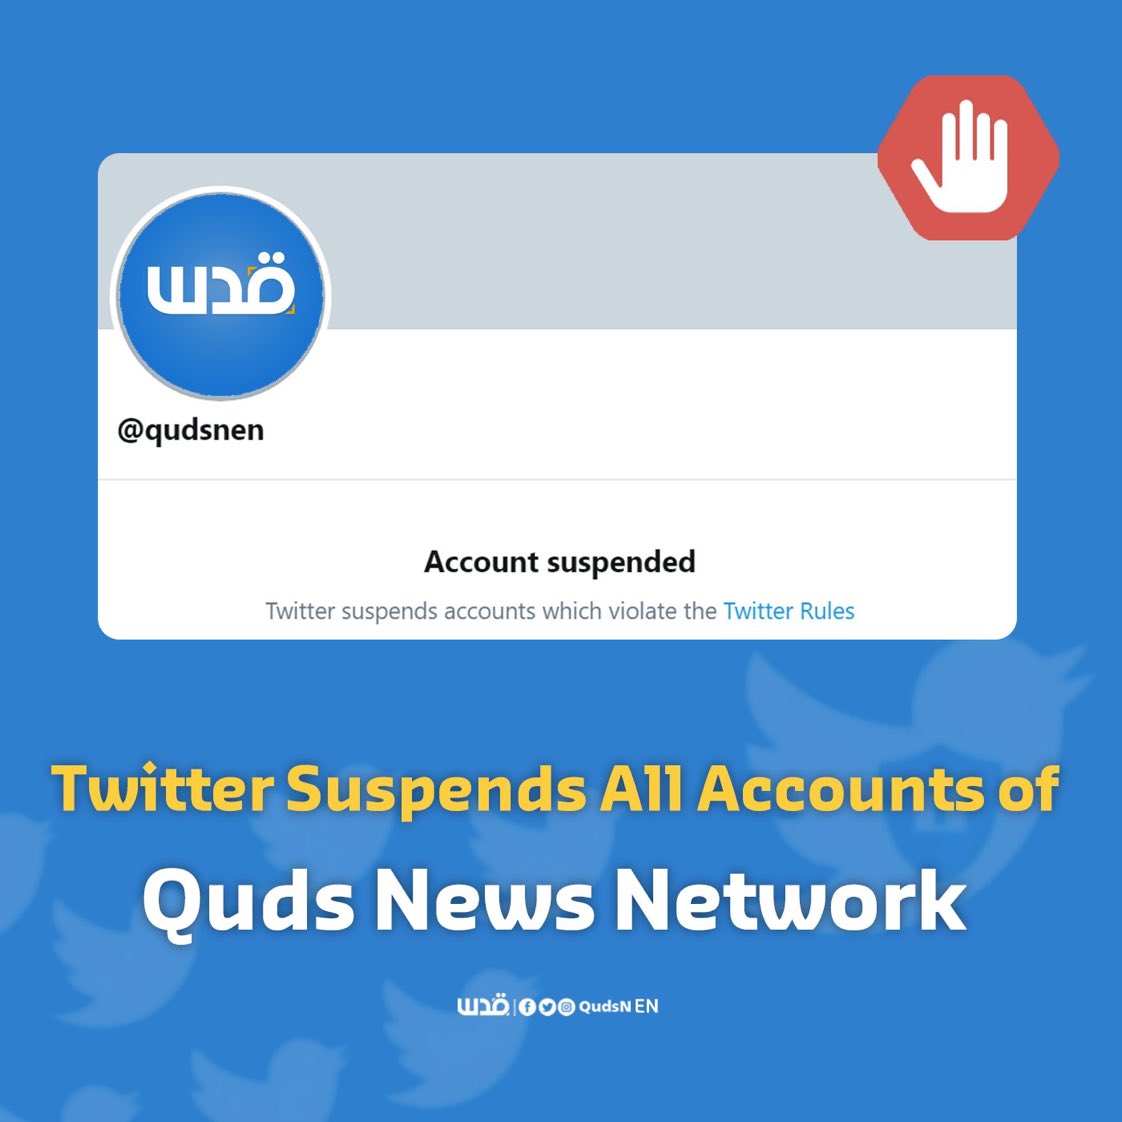 Twitter suspends accounts of Palestinian Quds News Network